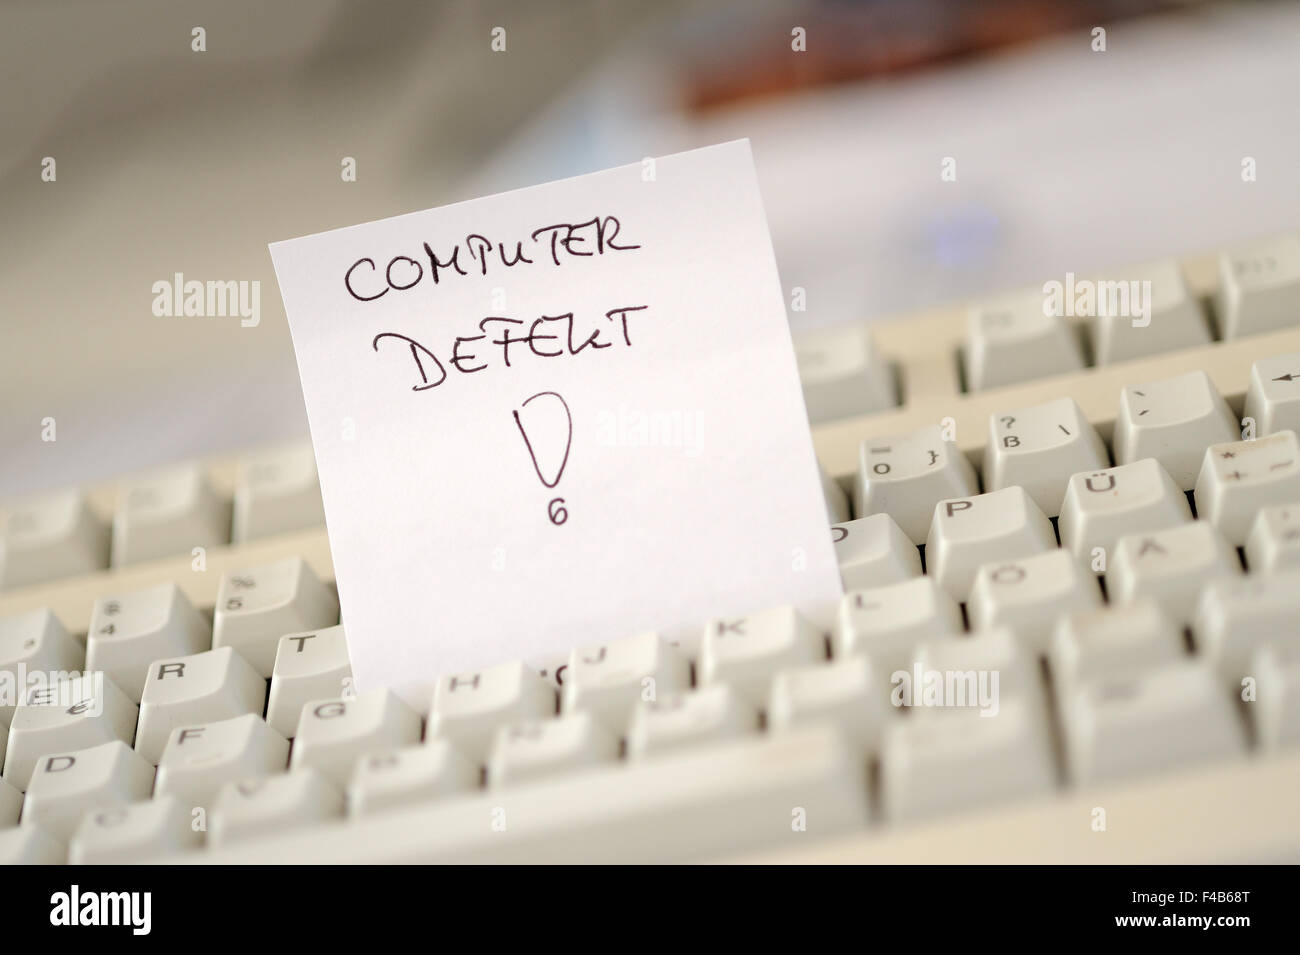 defect computer note Stock Photo